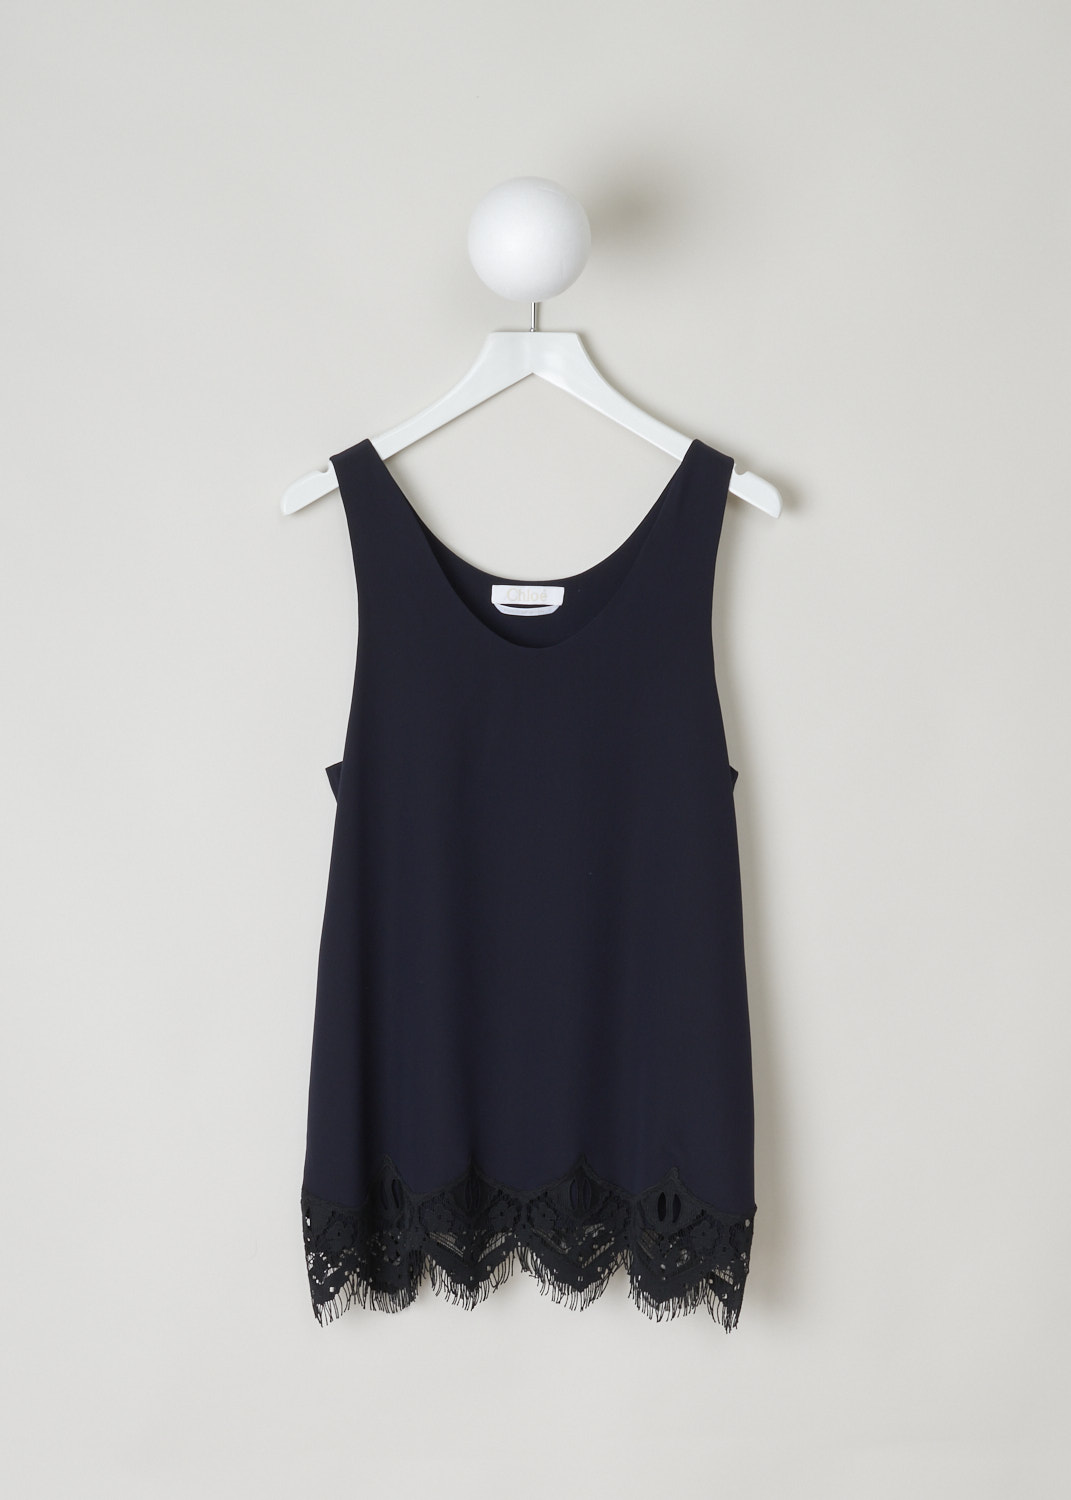 Chloé, Navy tank-top with black lace detailing, 16EHT92_16E004_7V1_navy_black, blue, front, A lovely basic being this navy tank-top. Featuring a scoop neckline, and has a lace decorated hem. 